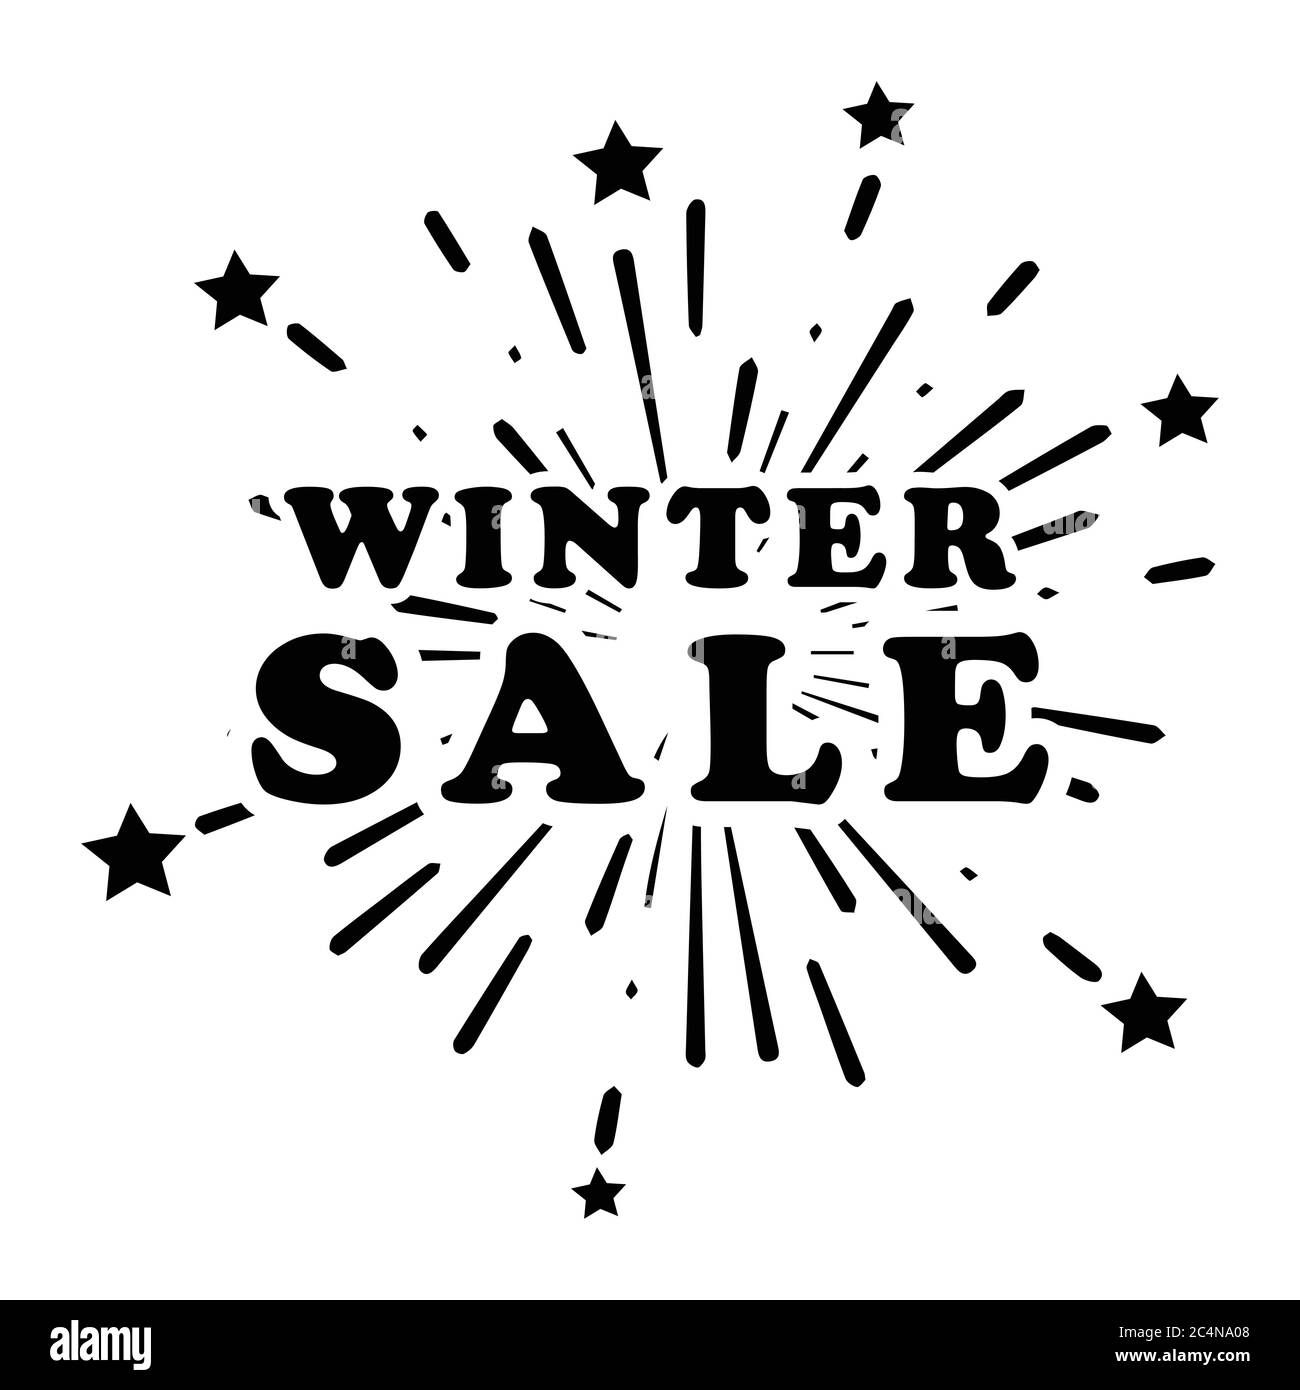 Winter Season Sale Fireworks Promotion Marketing Banner Poster. Advertising Ads for Retail Shop E-commerce business. Black Illustration Isolated on a Stock Vector